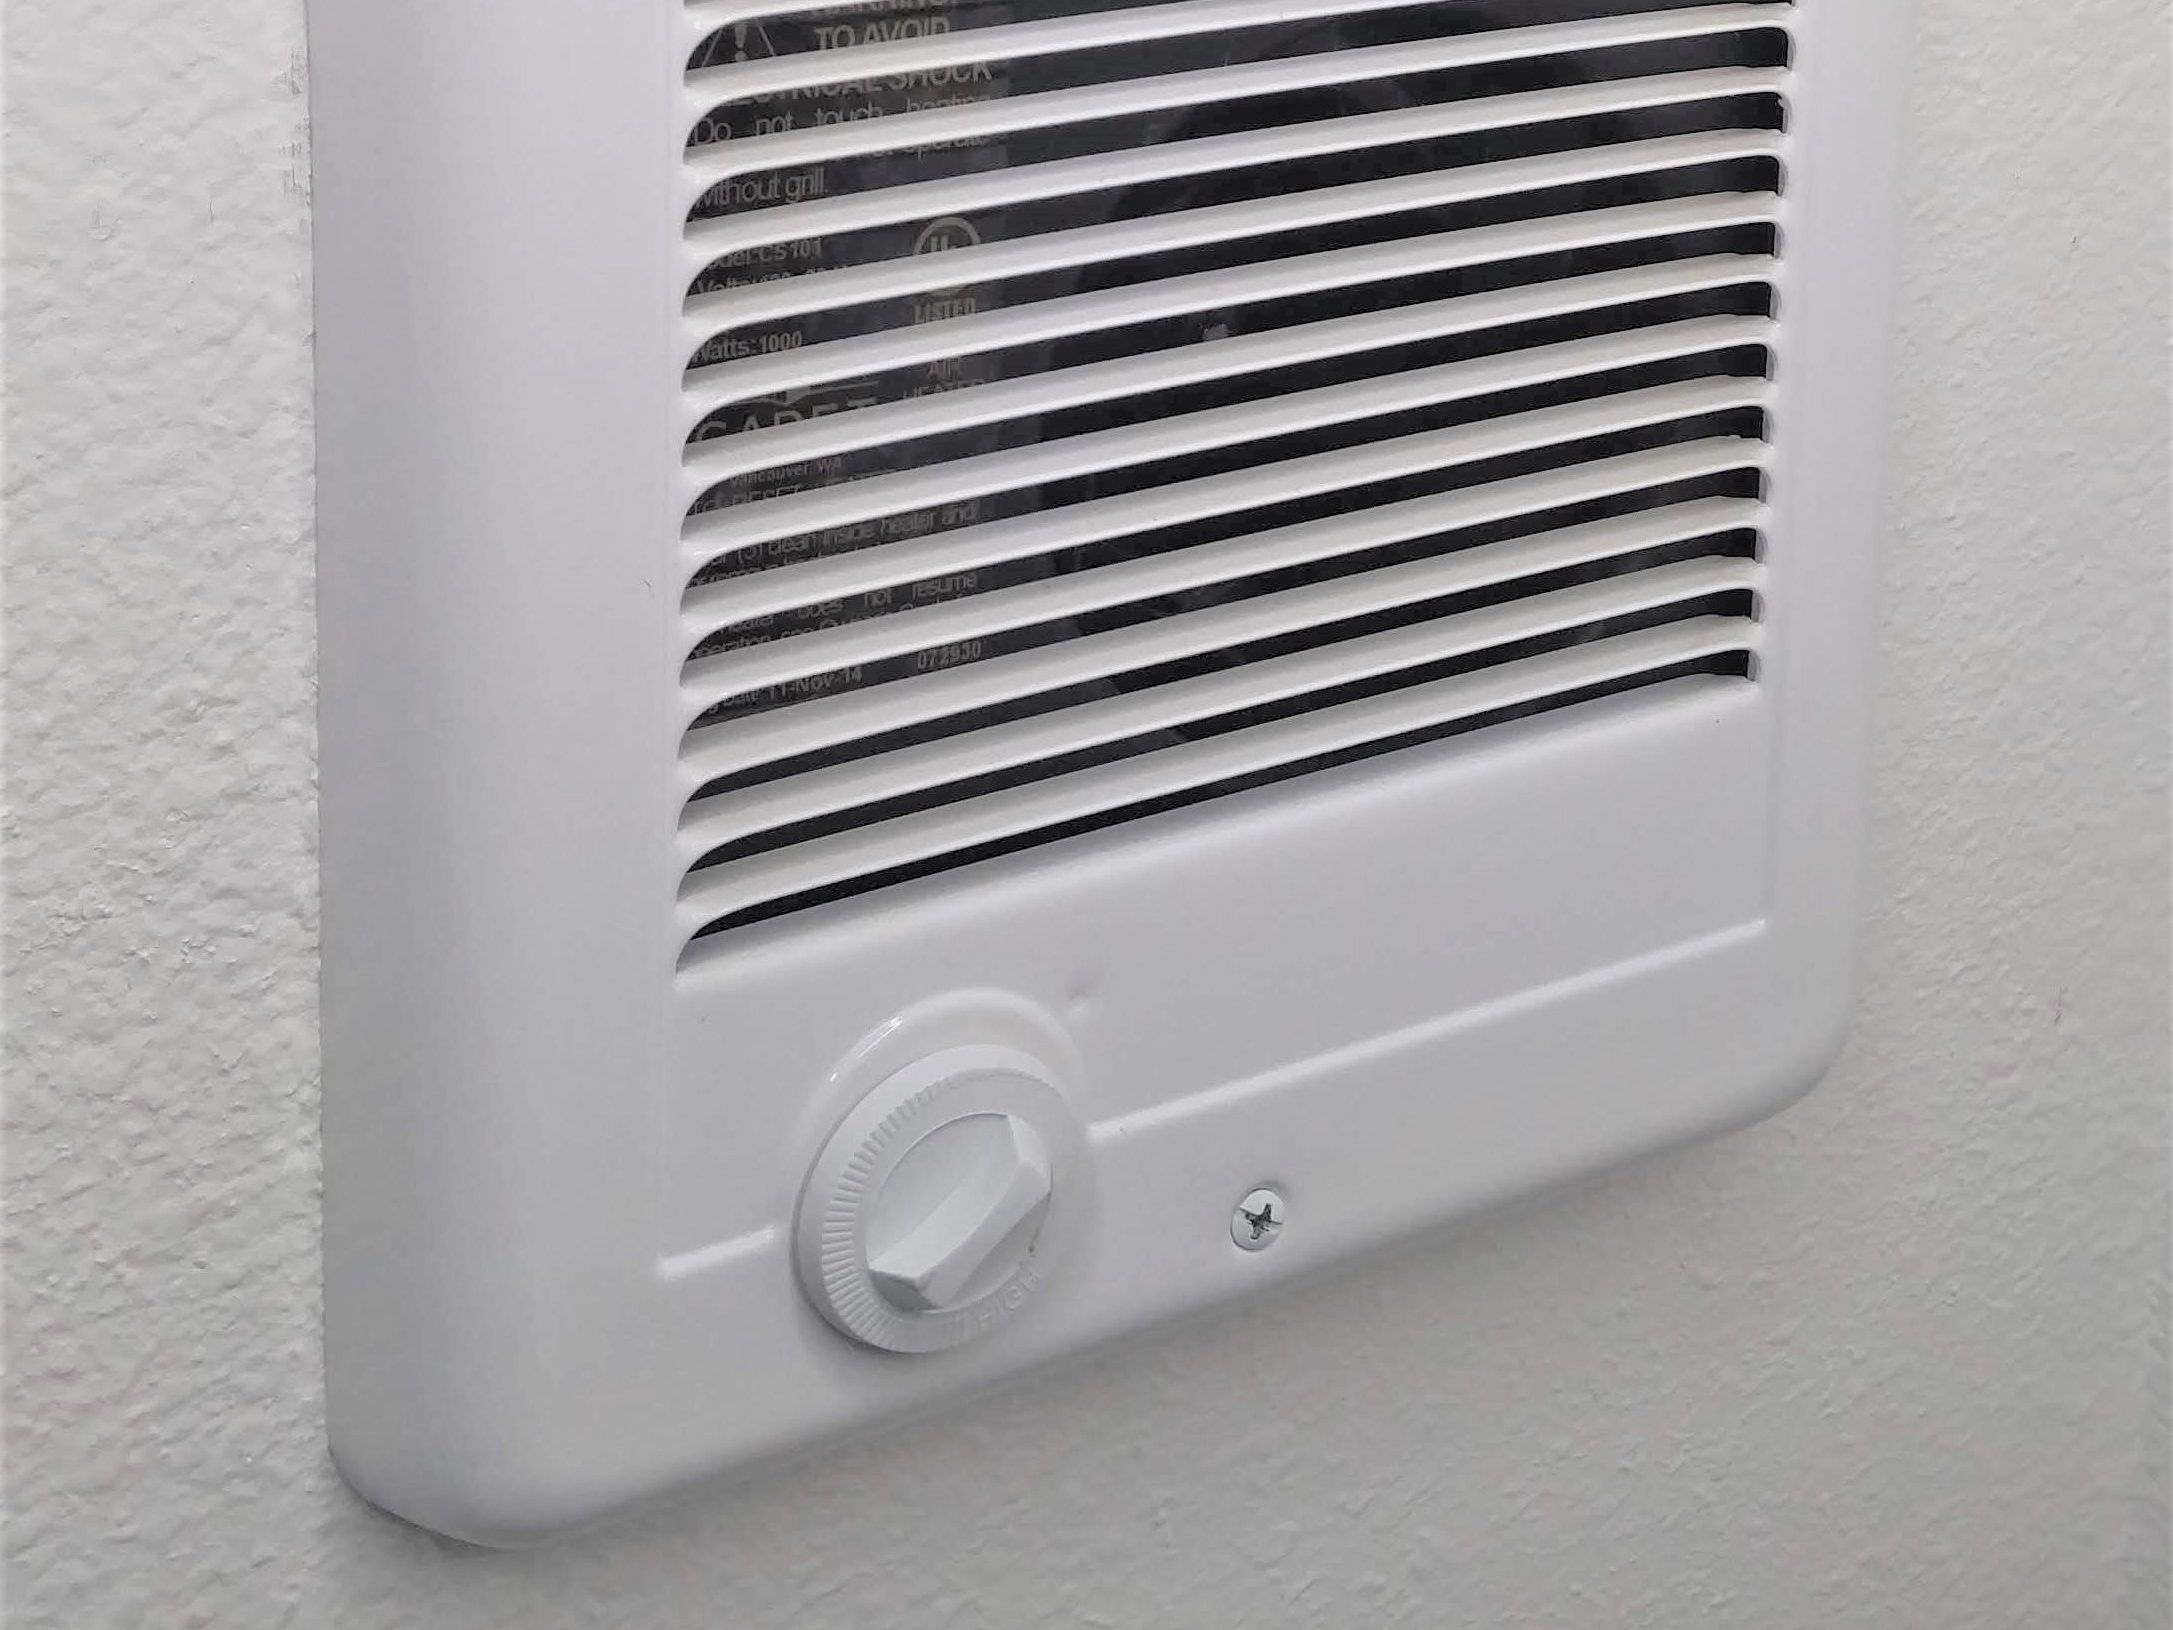 Basic information about wall heaters and their types